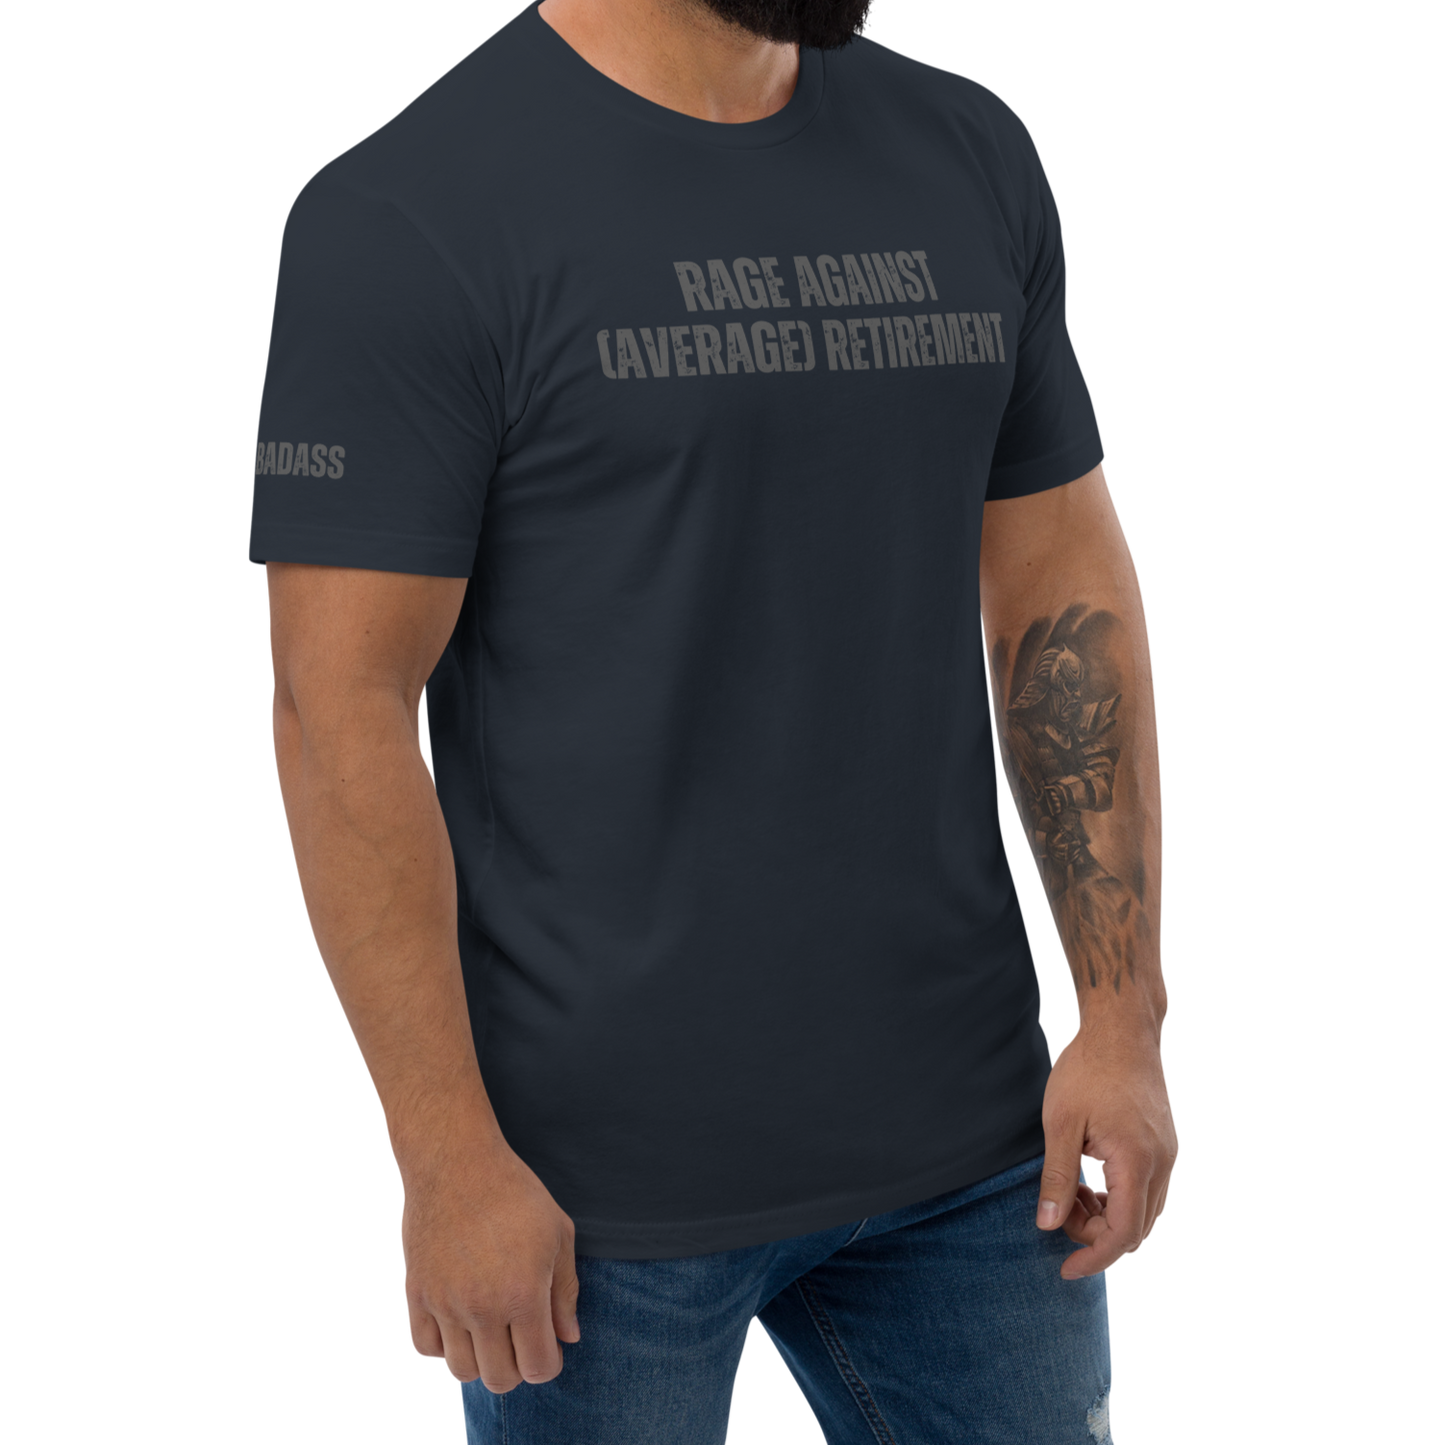 Rage Against (Average) Retirement Fitted Shirt